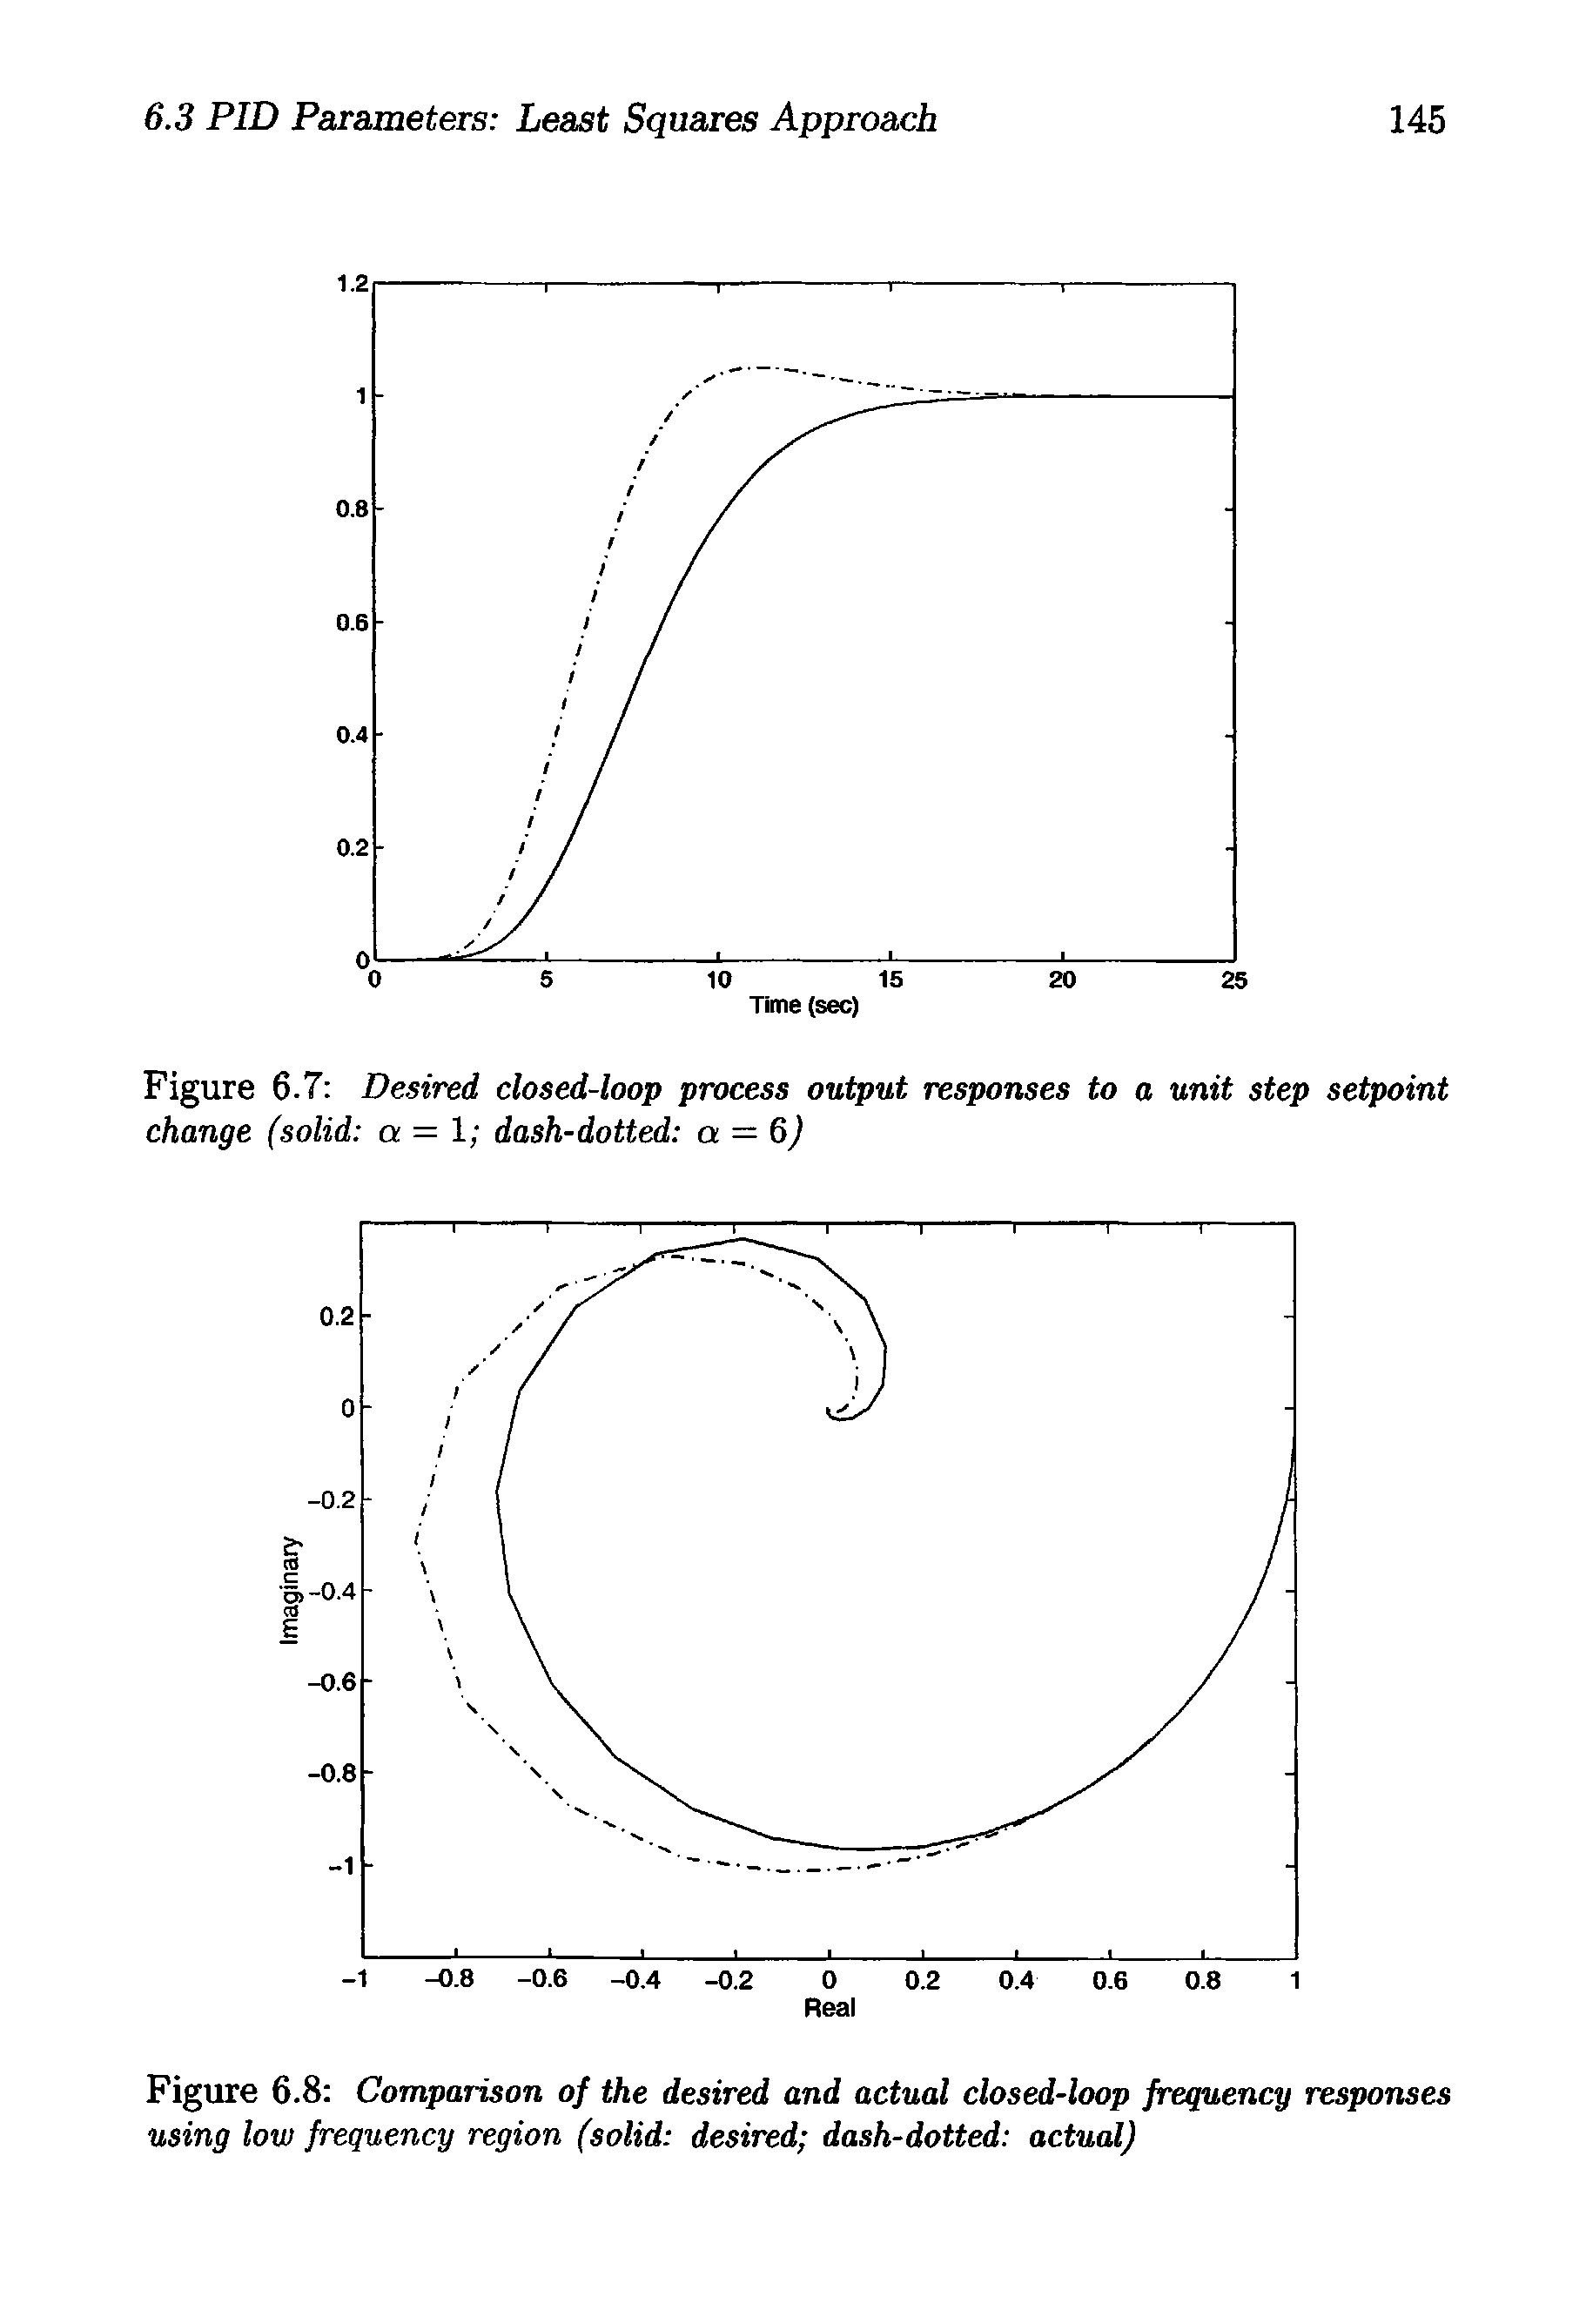 Figure 6.8 Comparison of the desired and actual closed-loop frequency responses using low frequency region (solid desired dash-dotted actual)...